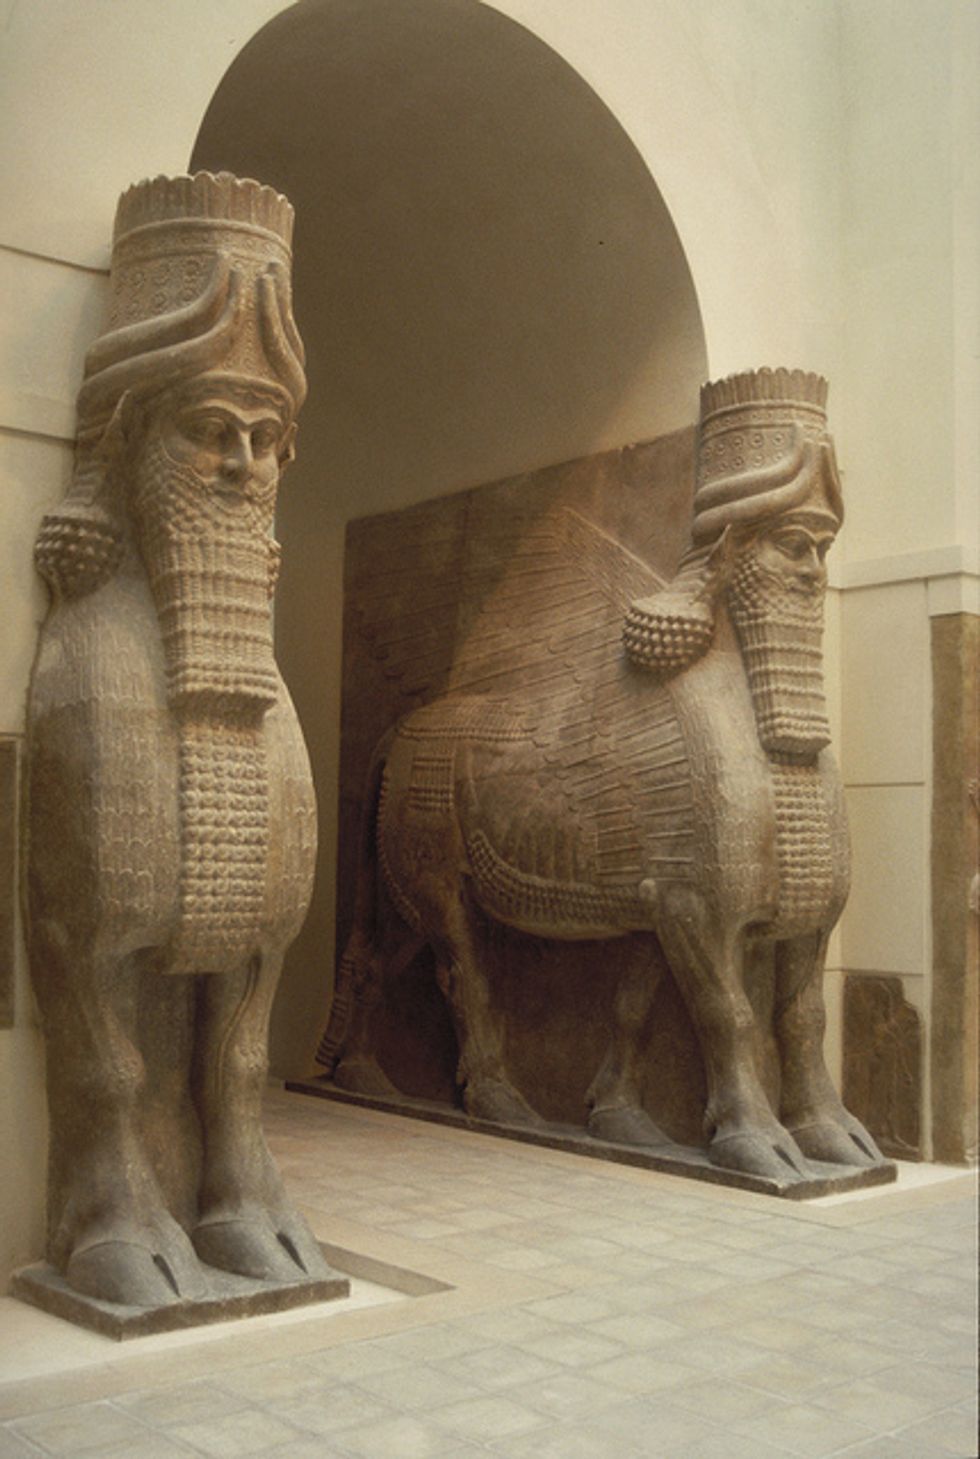 The Islamic State Is Wiping Out All Remnants of an Ancient Civilization